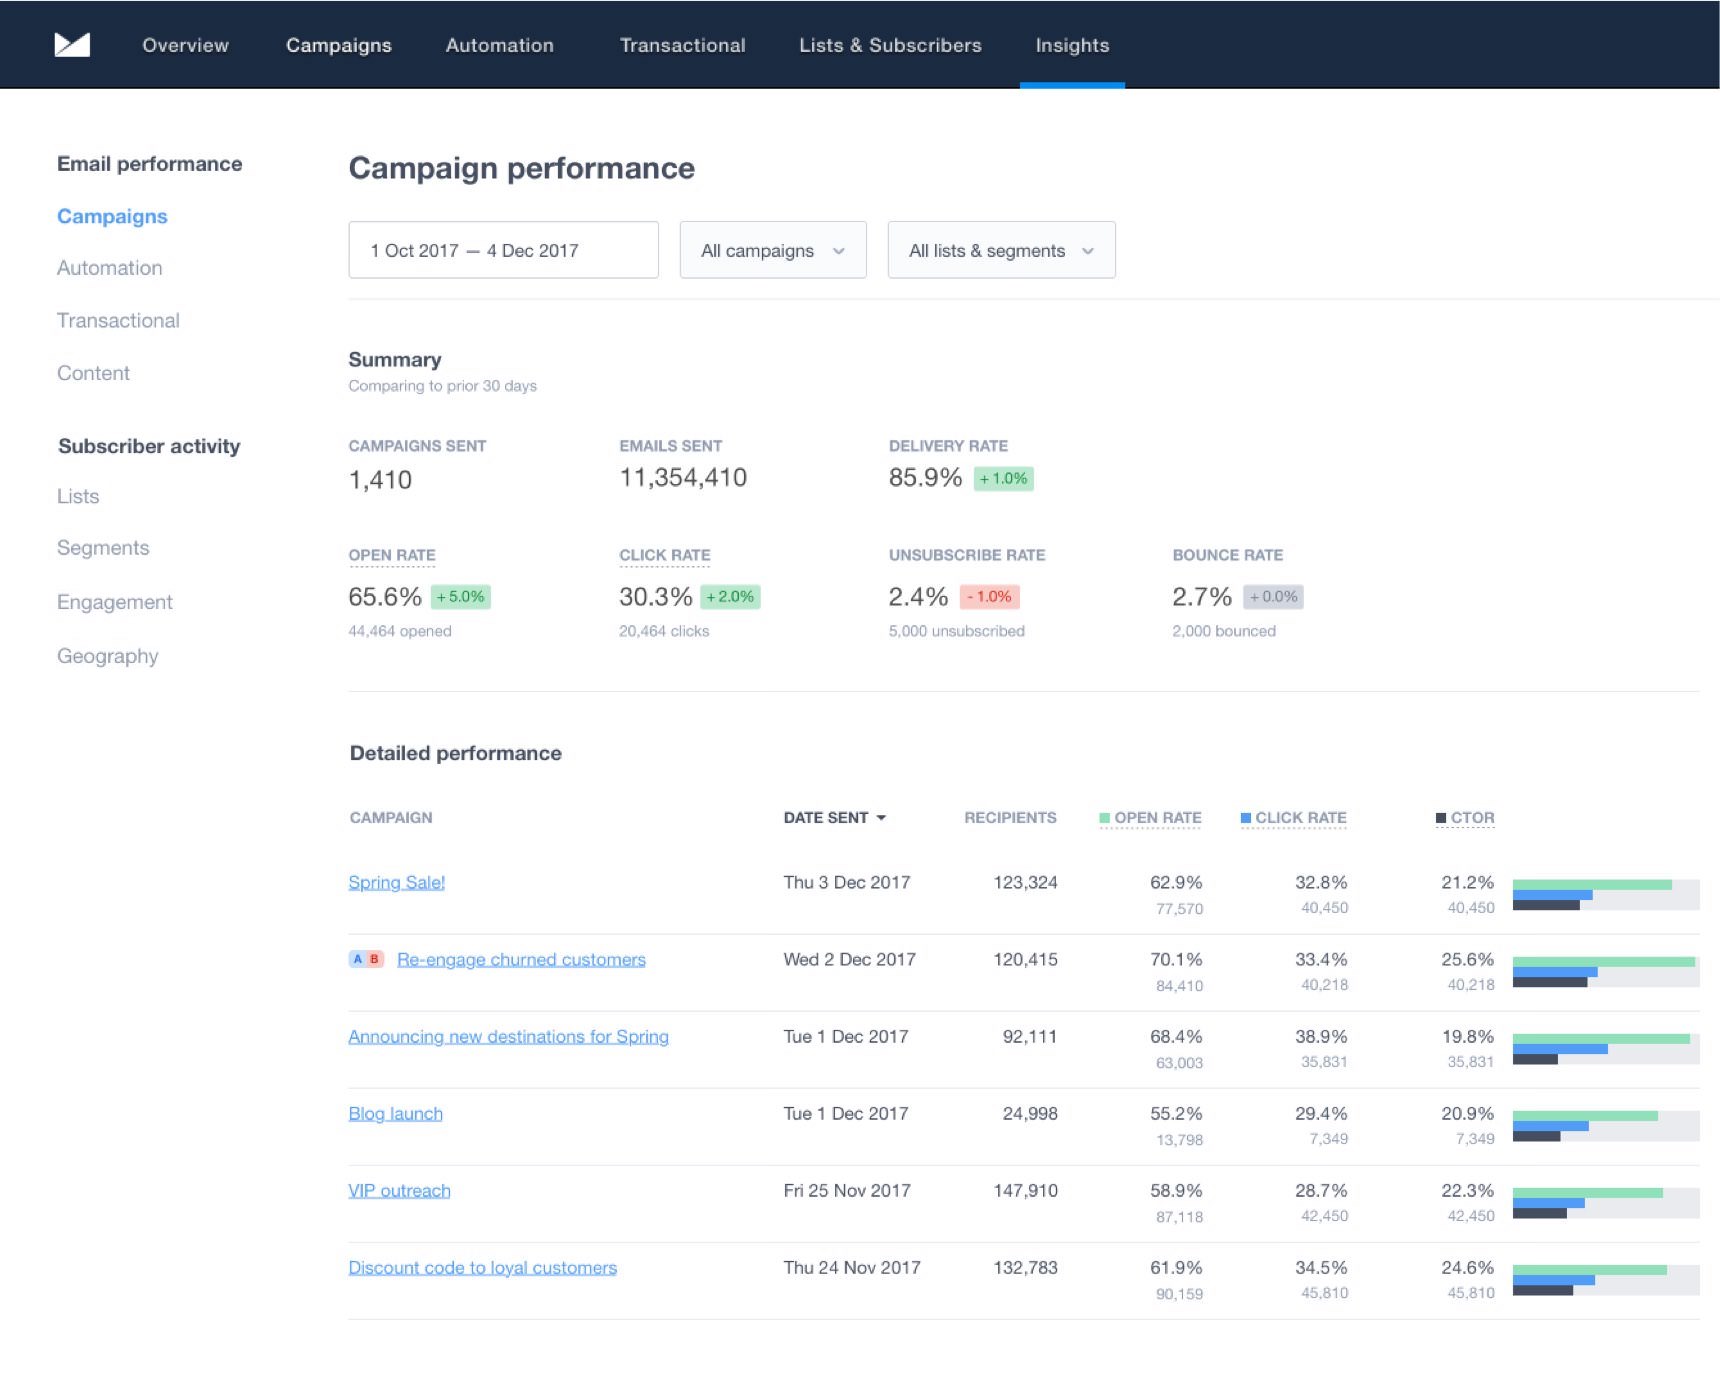 For email campaigns, Campaign Monitor offers a full suite of detailed analytics